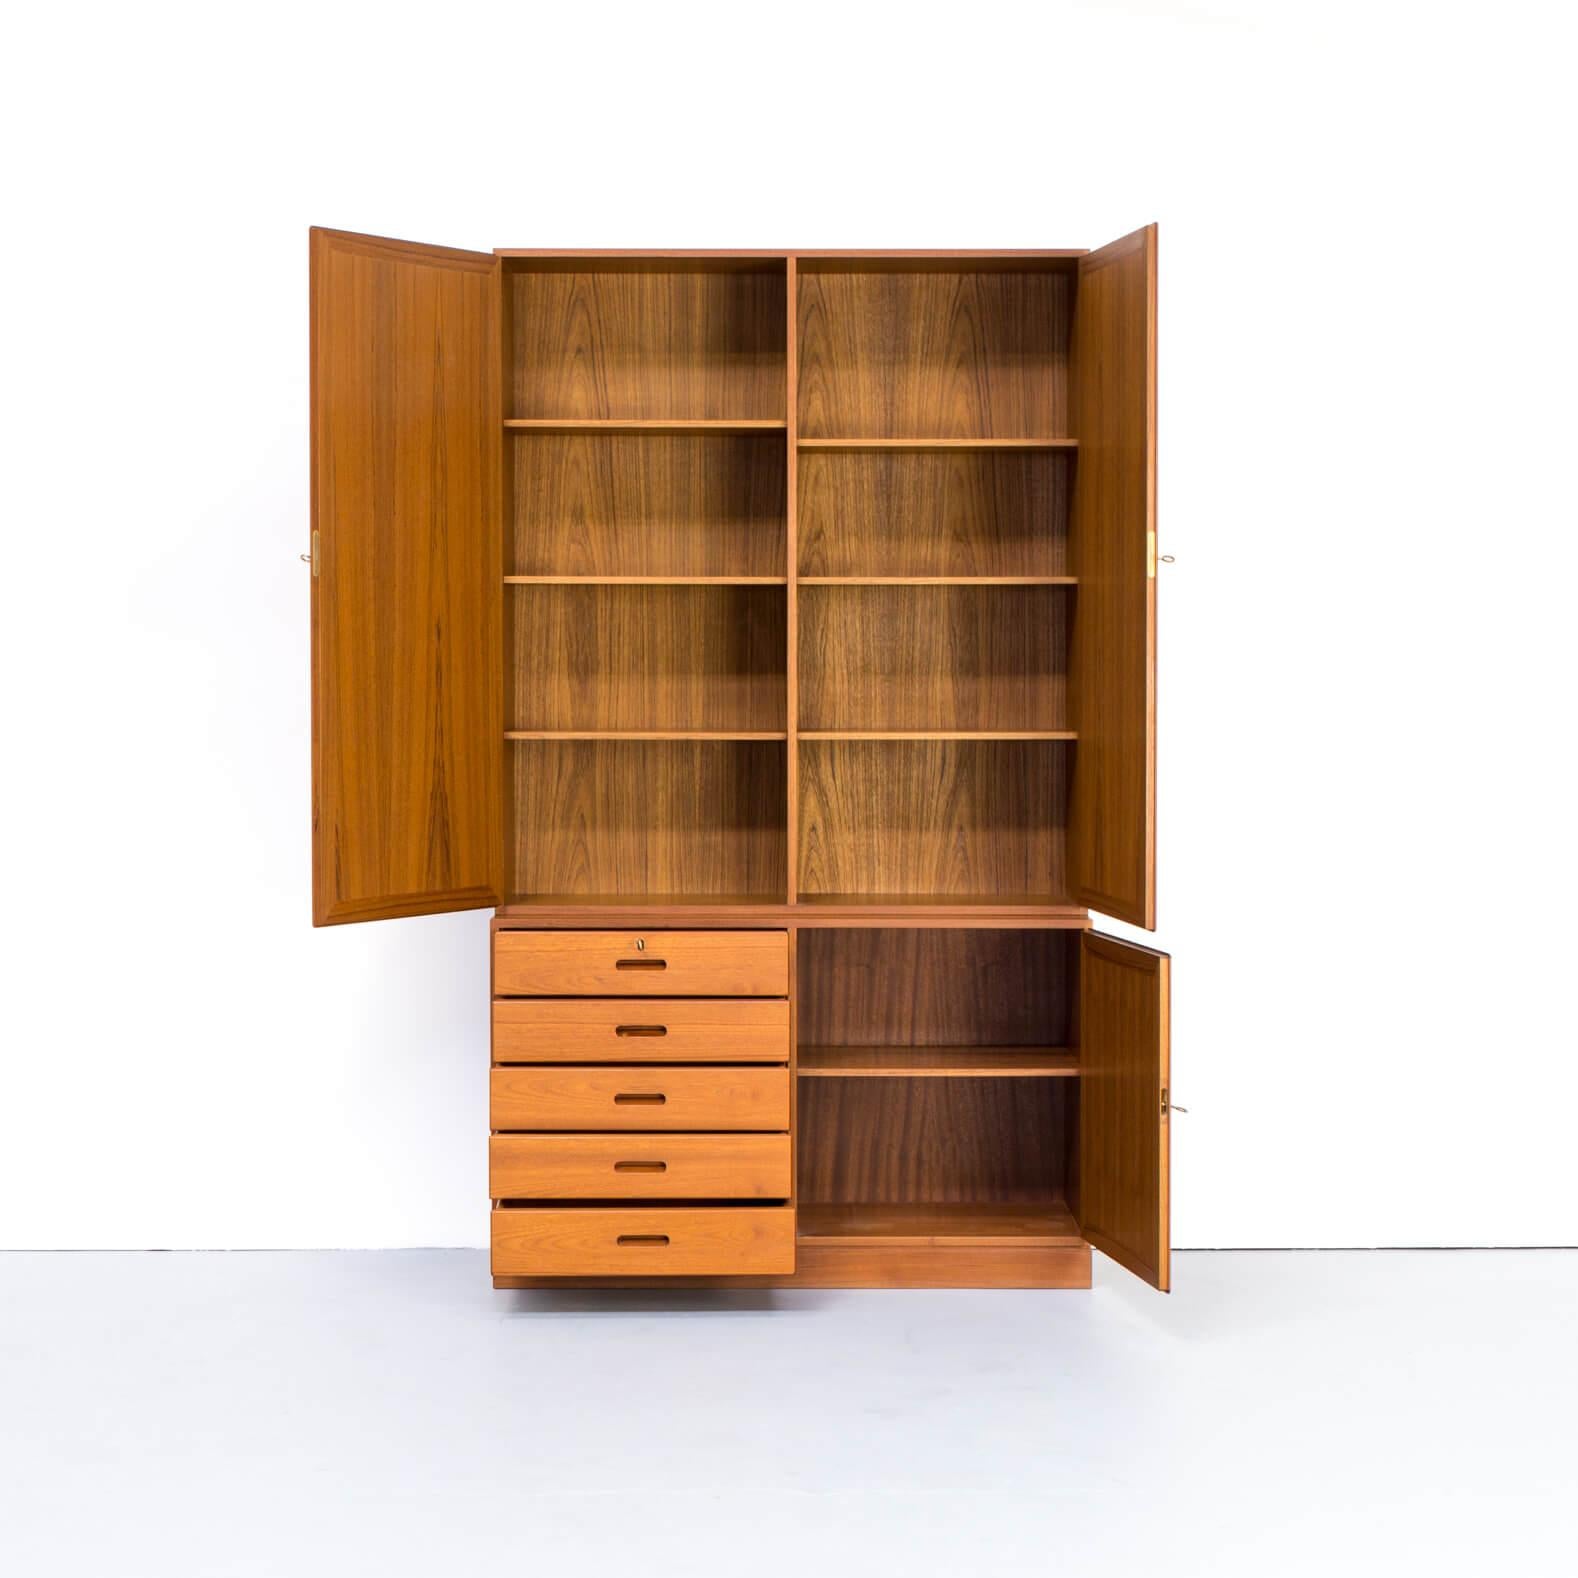 One beautiful teak cabinet from the German company WK Möbel, one of the oldest brands in furnishing. Thin lines, and lot of detail in the design by Georg Satink. He was ahead of time. The cabinet can be separated in two parts under section and upper